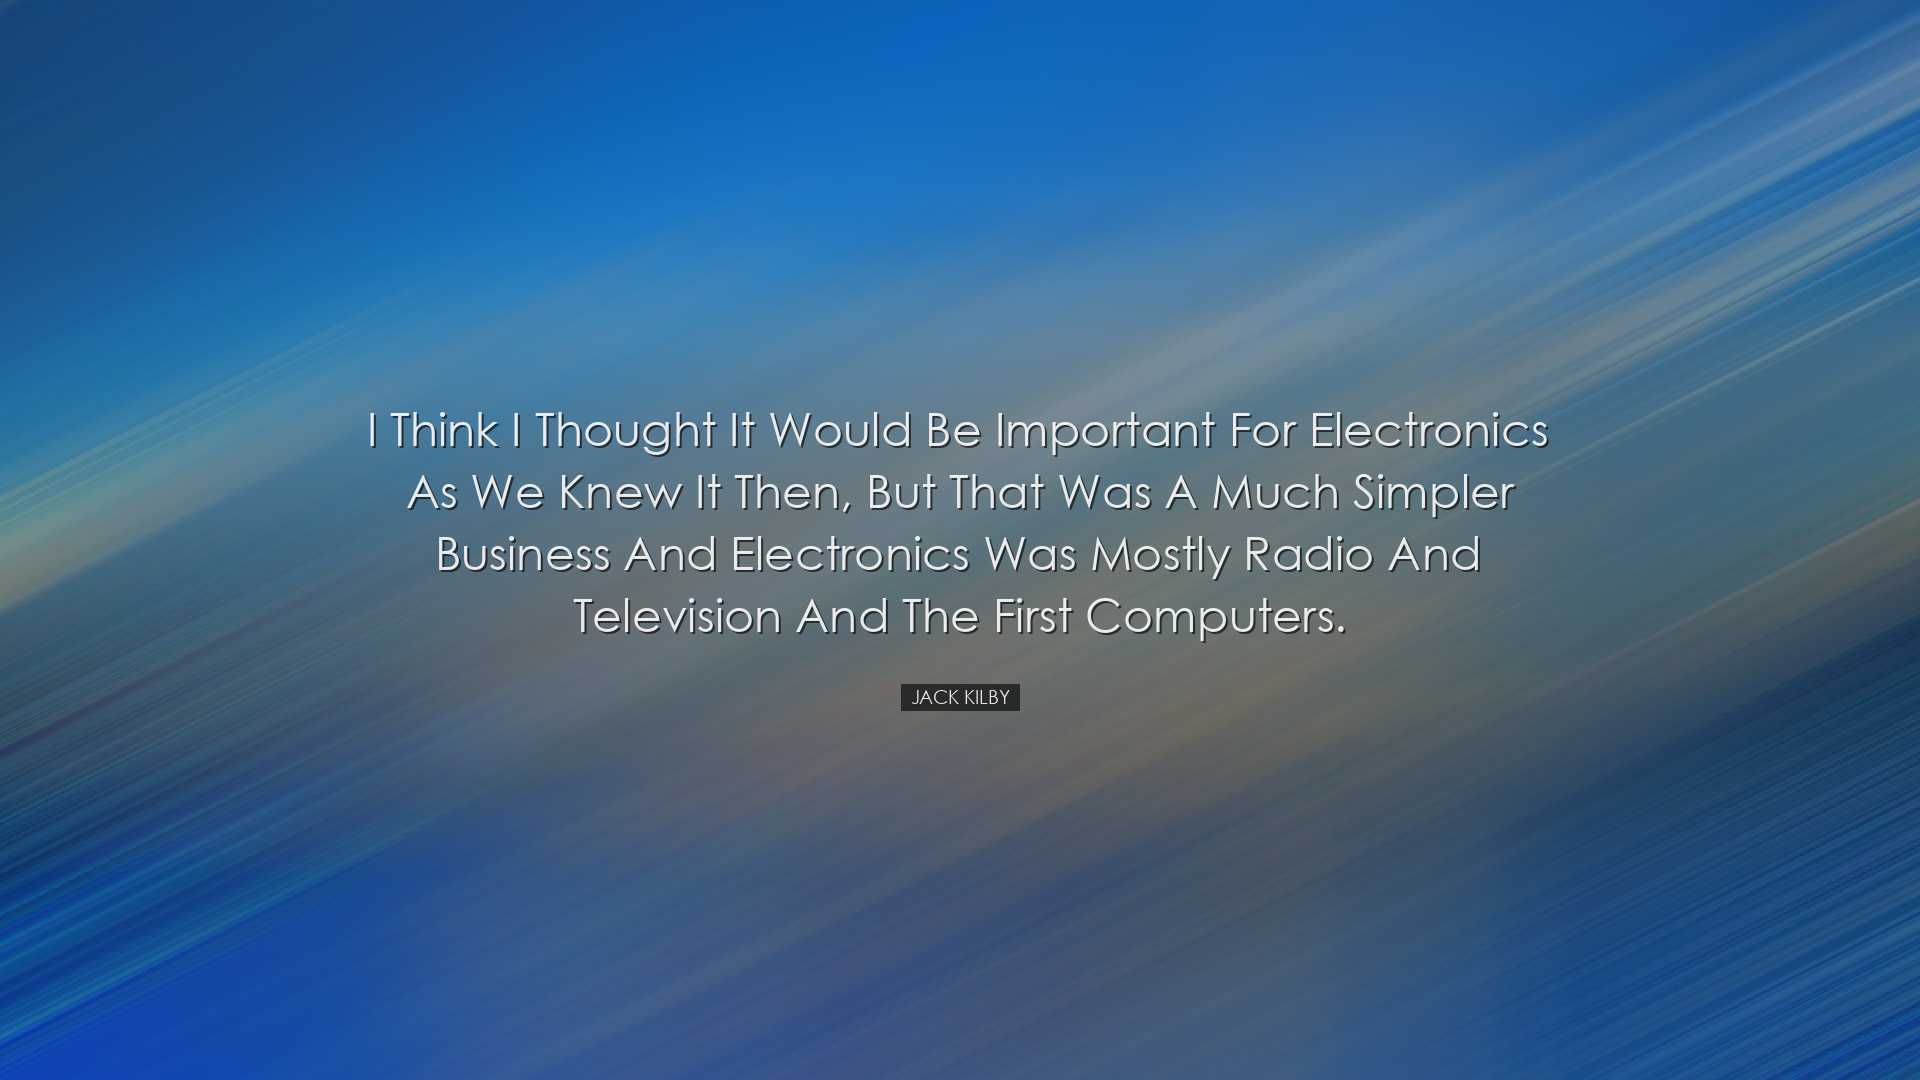 I think I thought it would be important for electronics as we knew